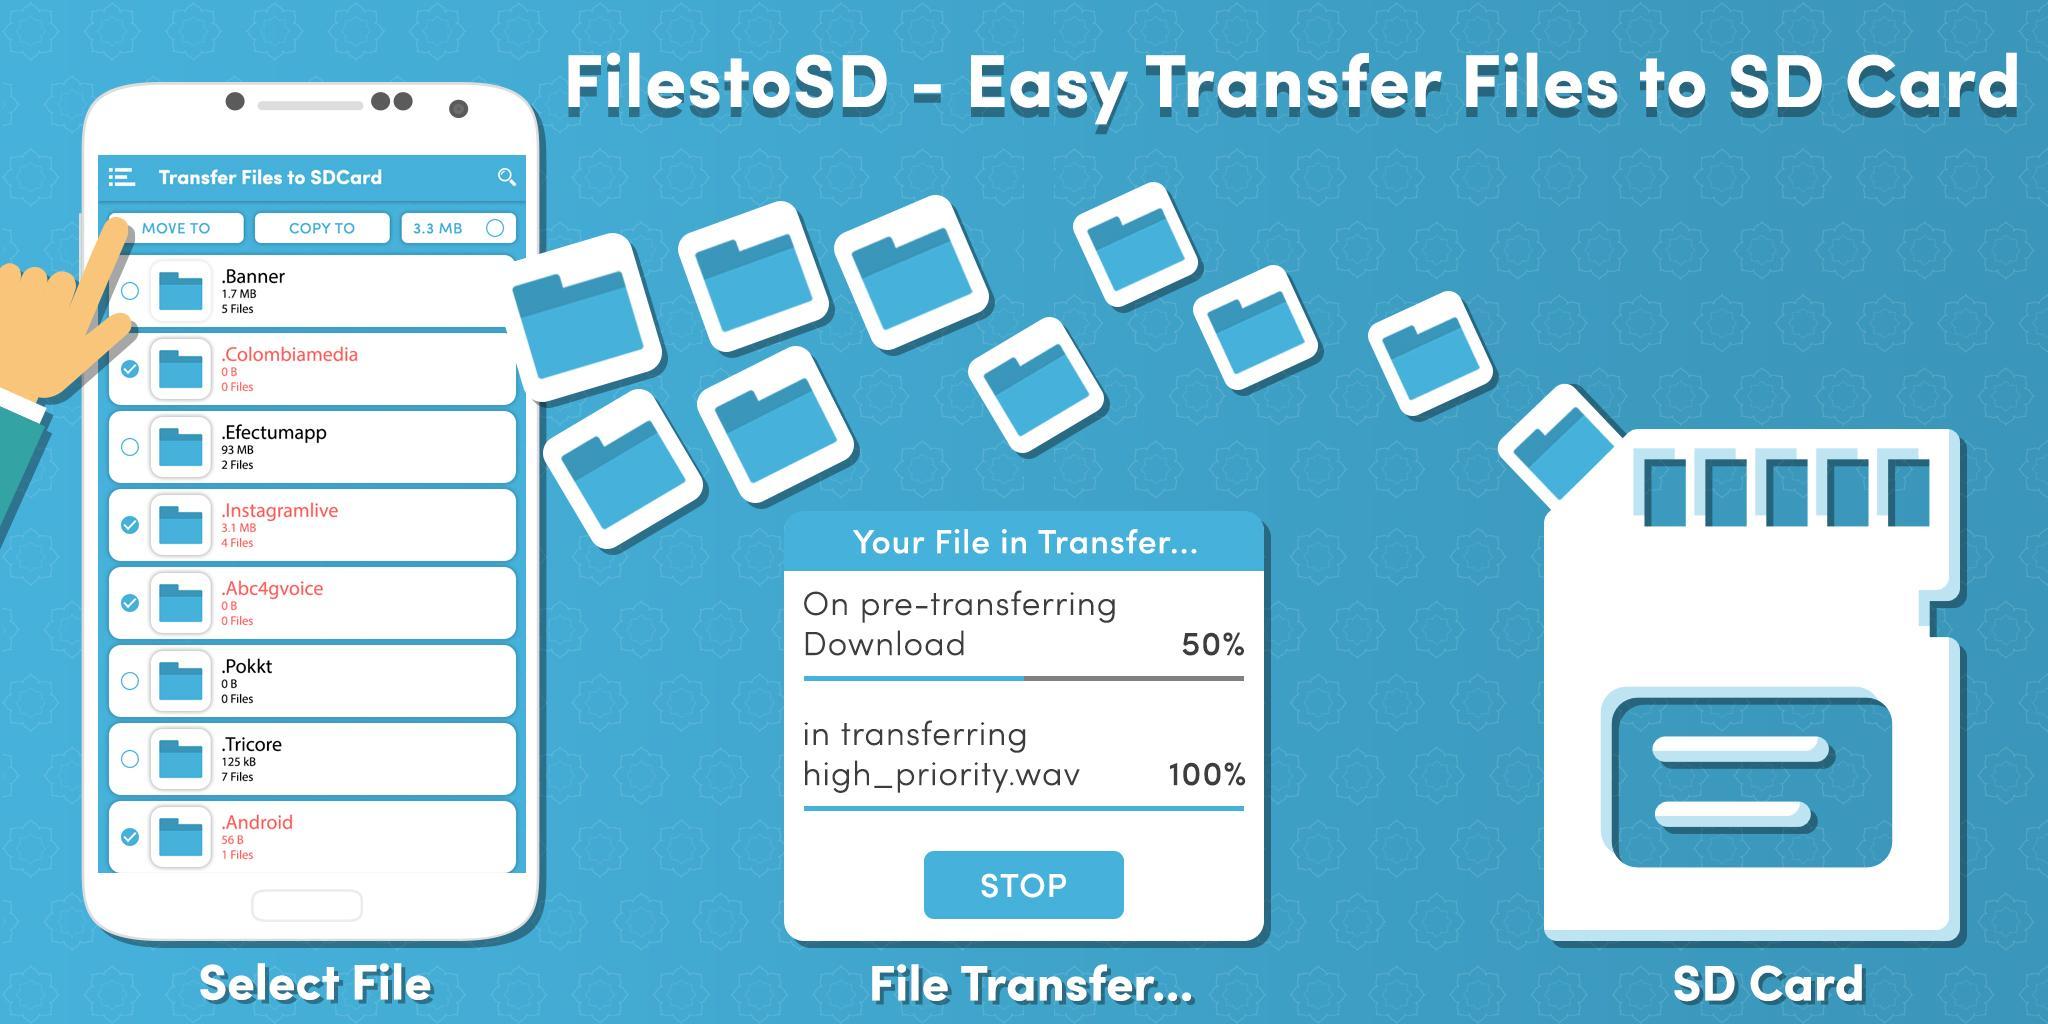 FilestoSD - Easy Transfer Files to SD Card for Android - APK Download